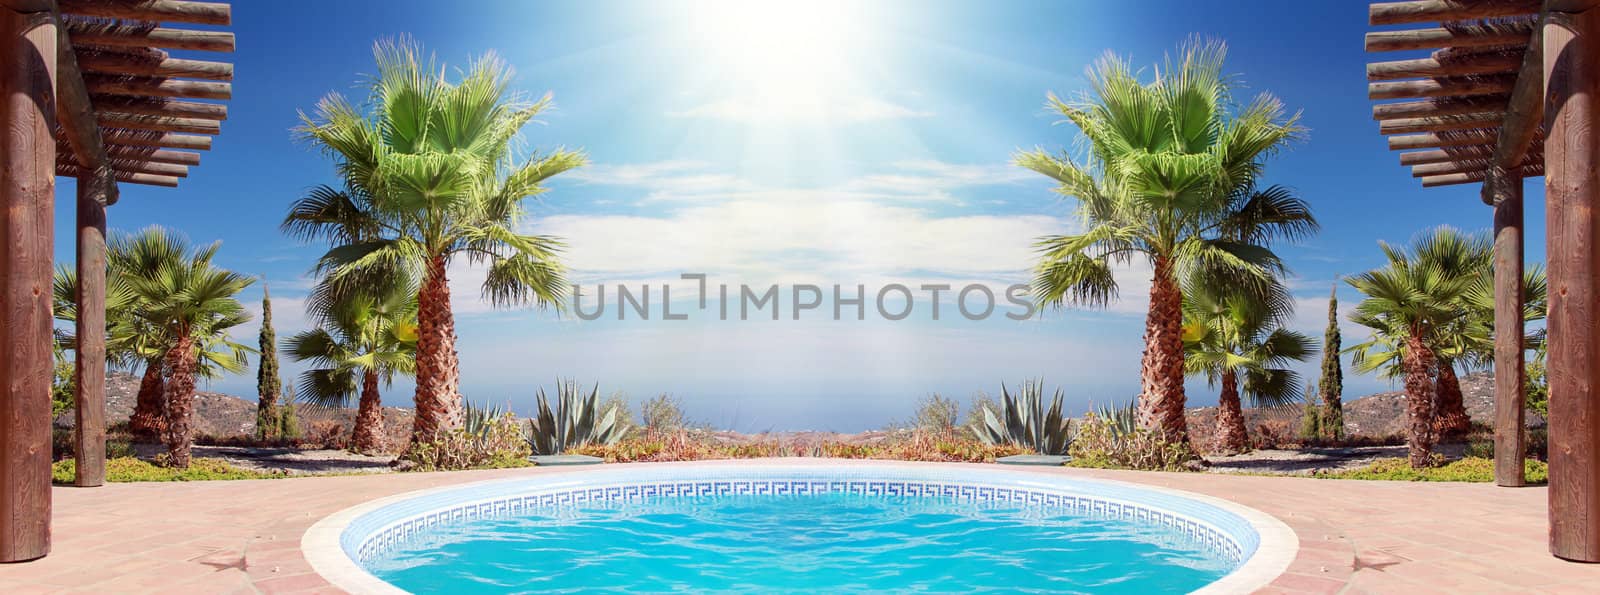 Tropical Scene with swimming pool and nice palm